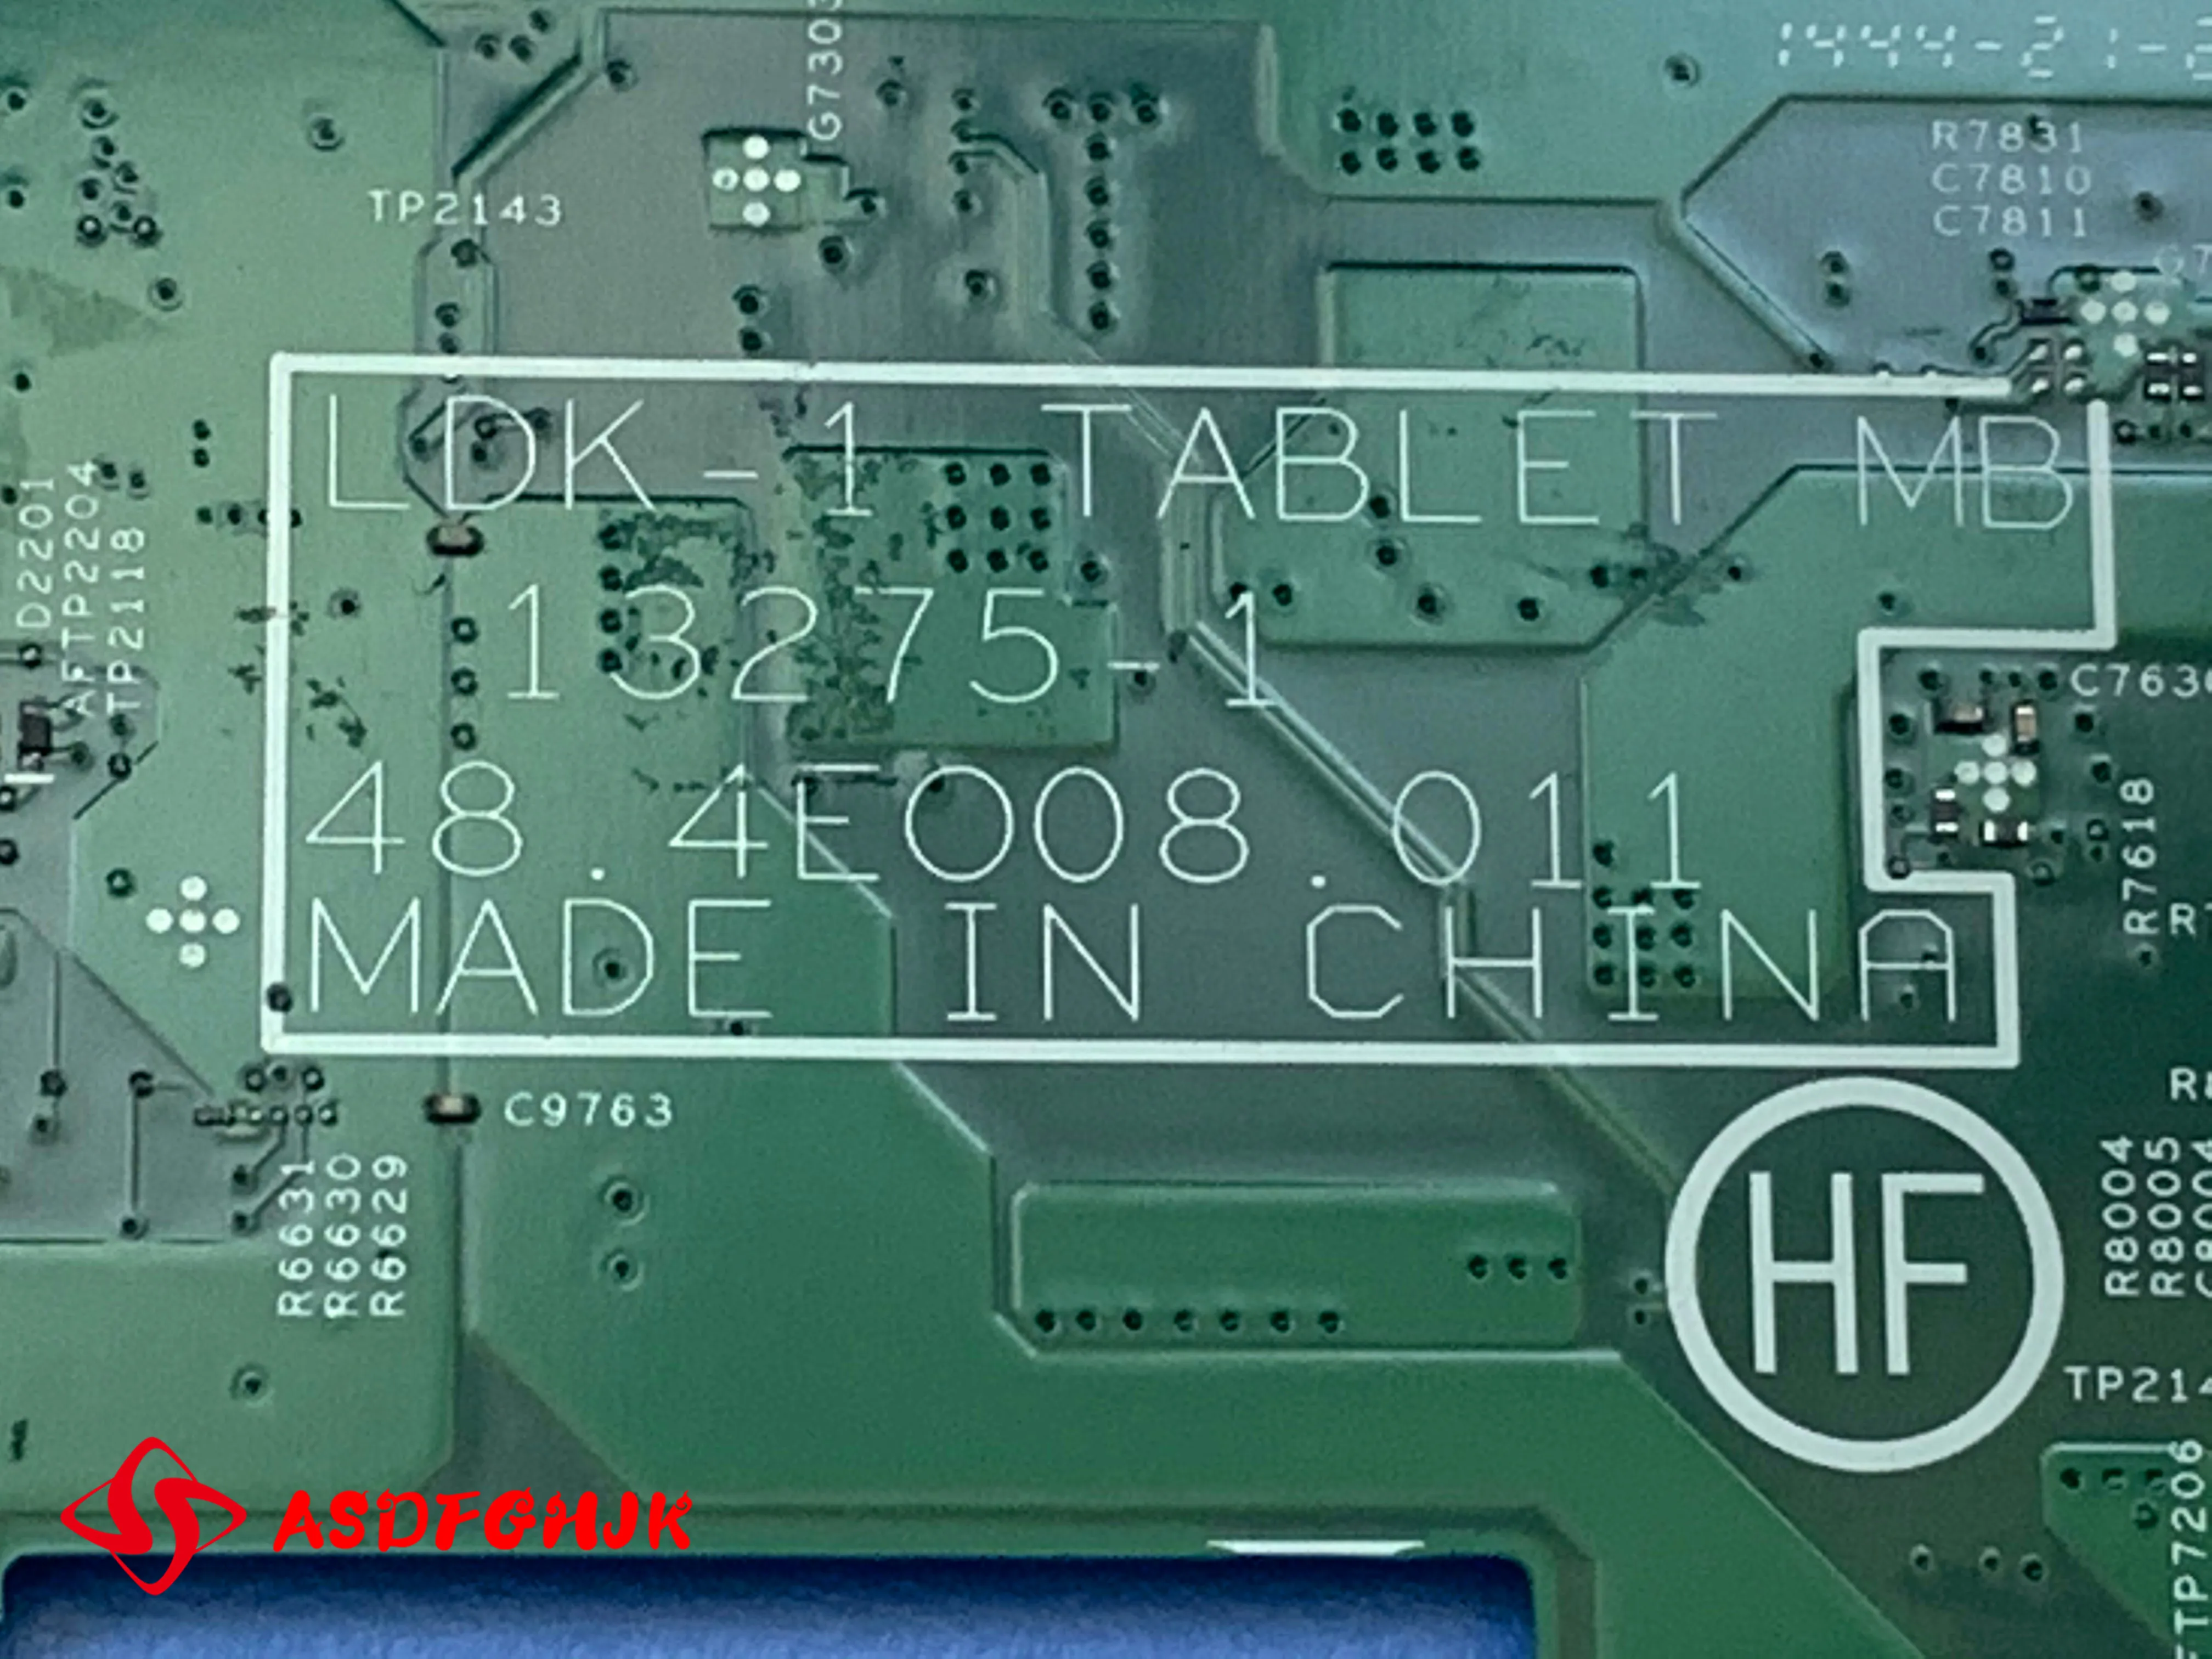 

00JT701 FOR Lenovo ThinkPad Helix Type 20CG 20CH Motherboard 48.4EO08.011 LDK-1 TABLET MB 100% TESED OK